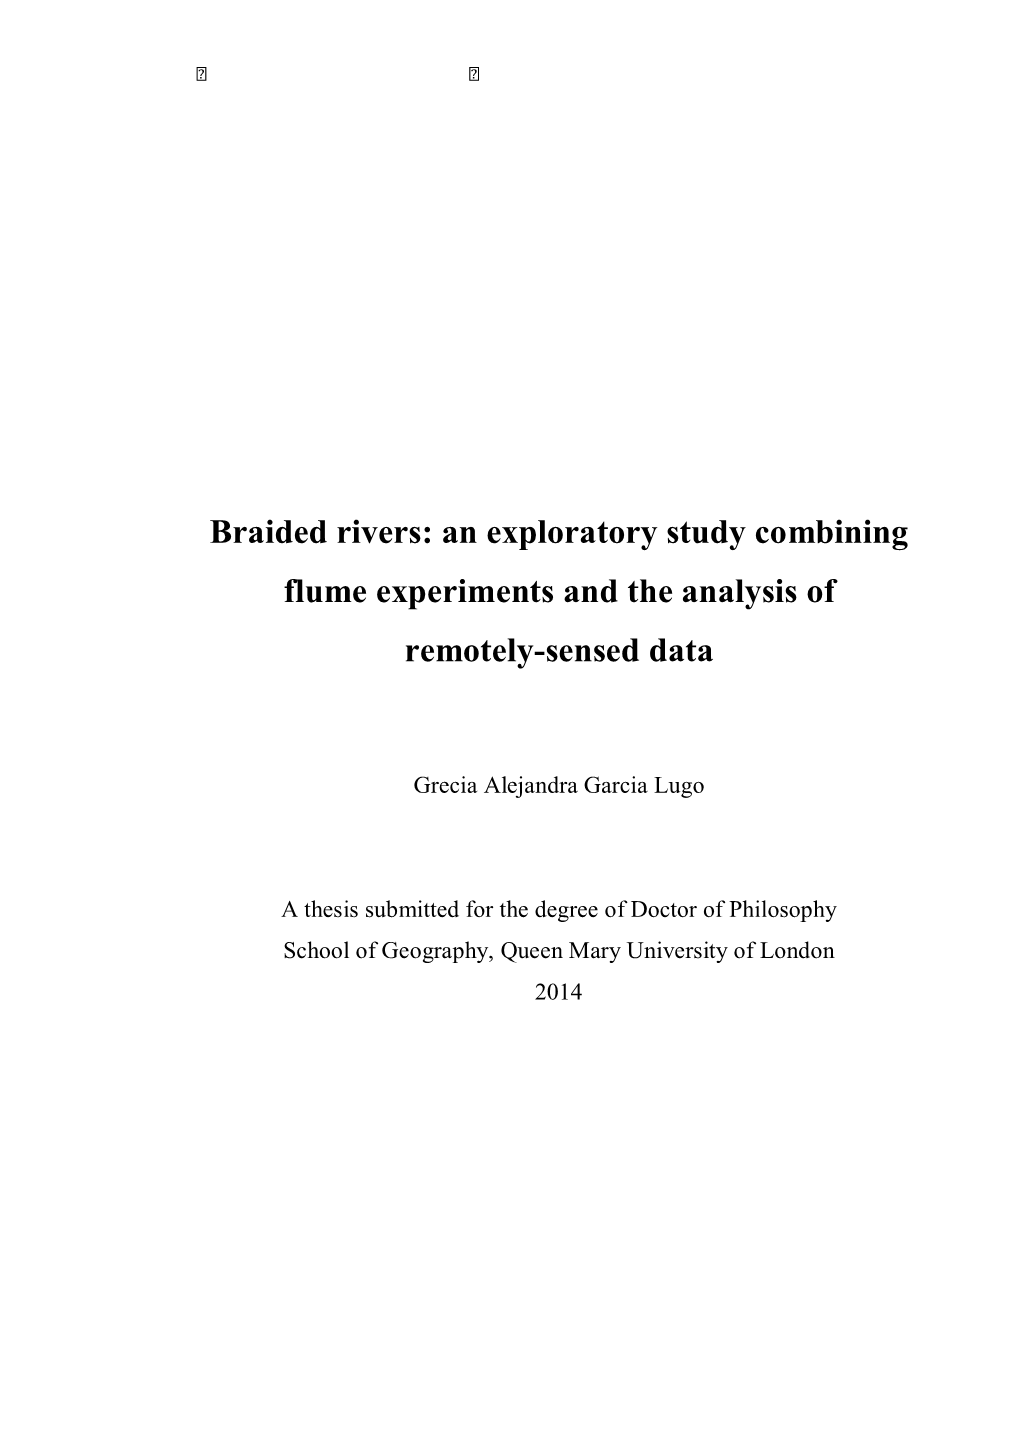 Braided Rivers: an Exploratory Study Combining Flume Experiments and the Analysis of Remotely-Sensed Data